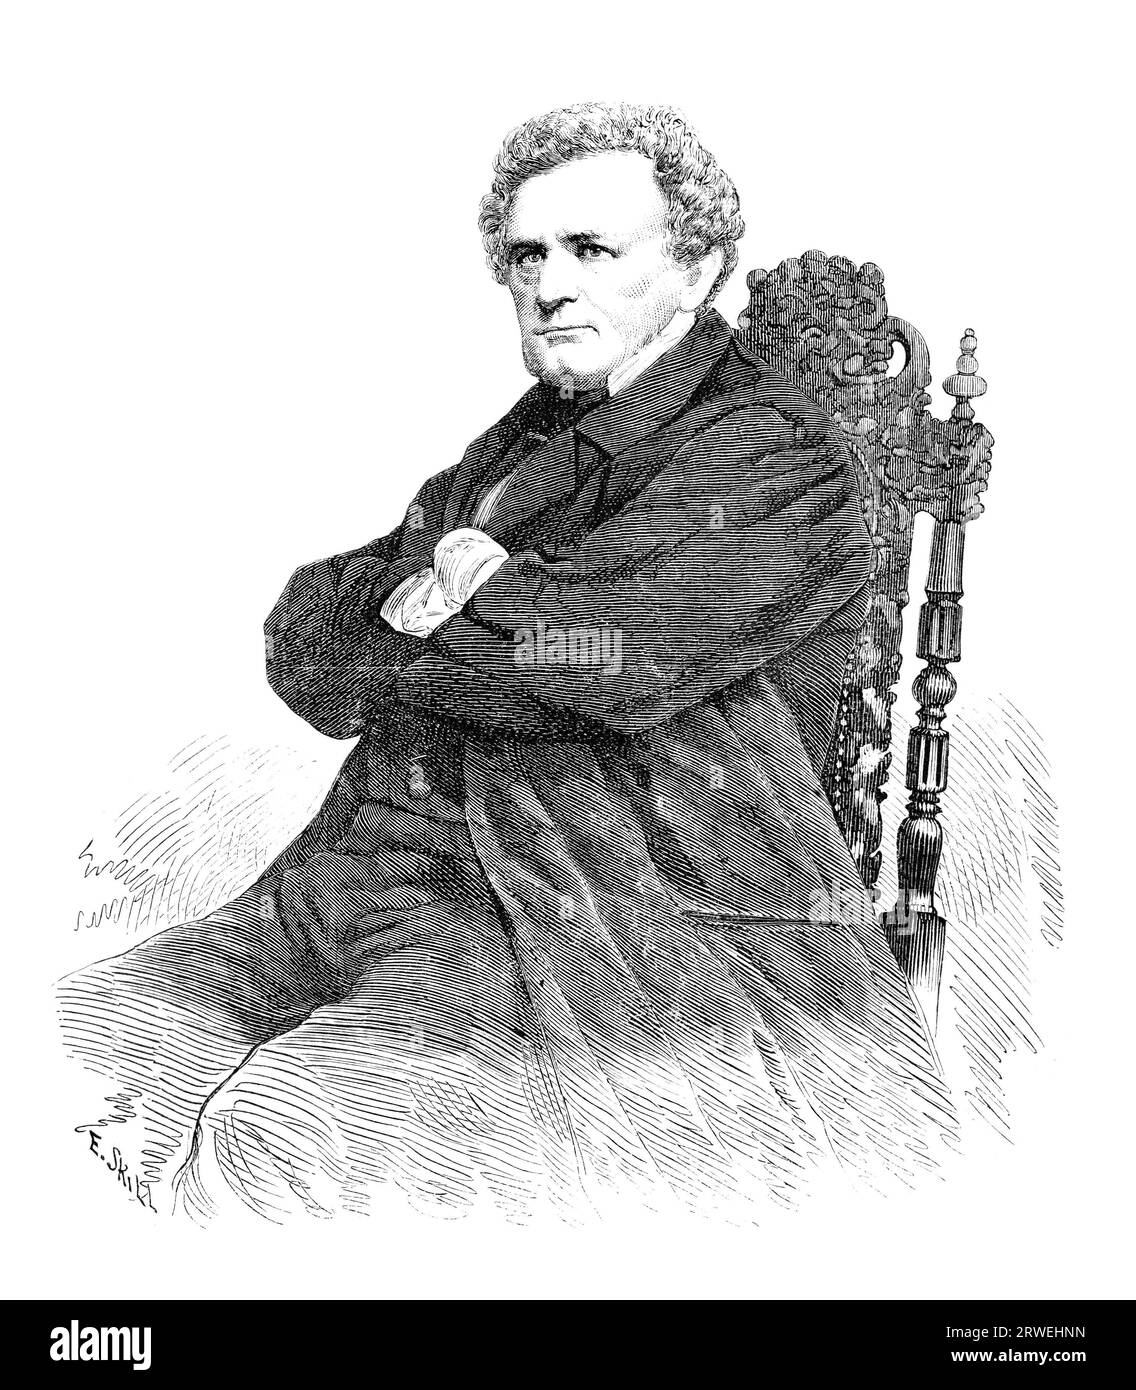 Peter Martin Orla Lehmann (1810-1870) was a Danish statesman, a key figure in the development of Denmarks parliamentary government. Old engraving Stock Photo